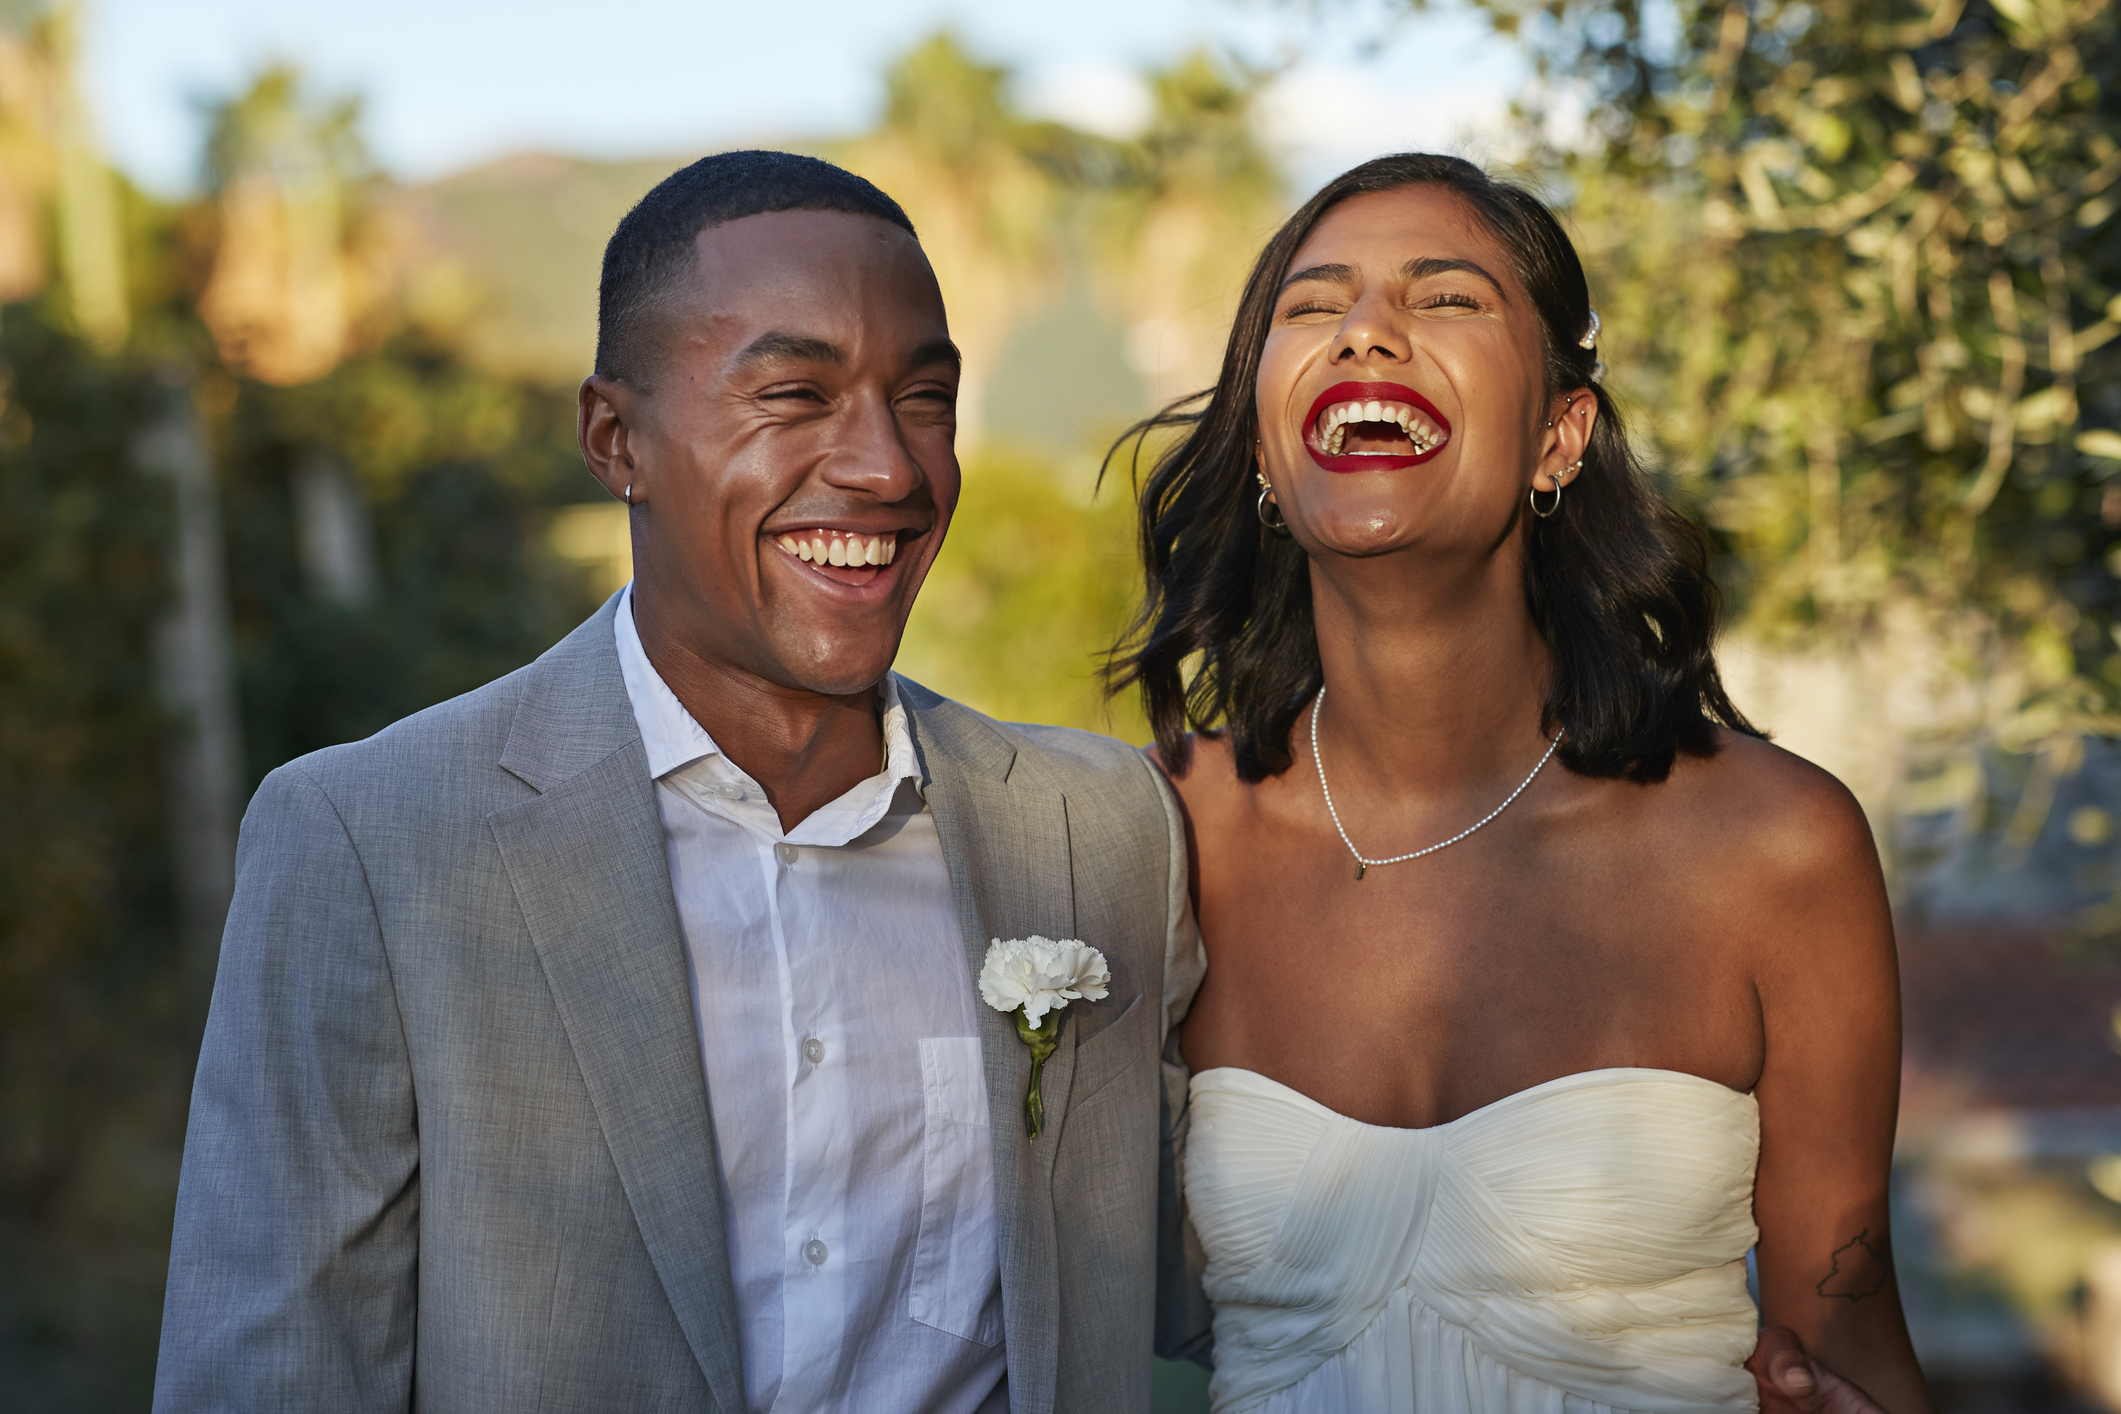 Two people in wedding attire smiling joyfully, likely a couple